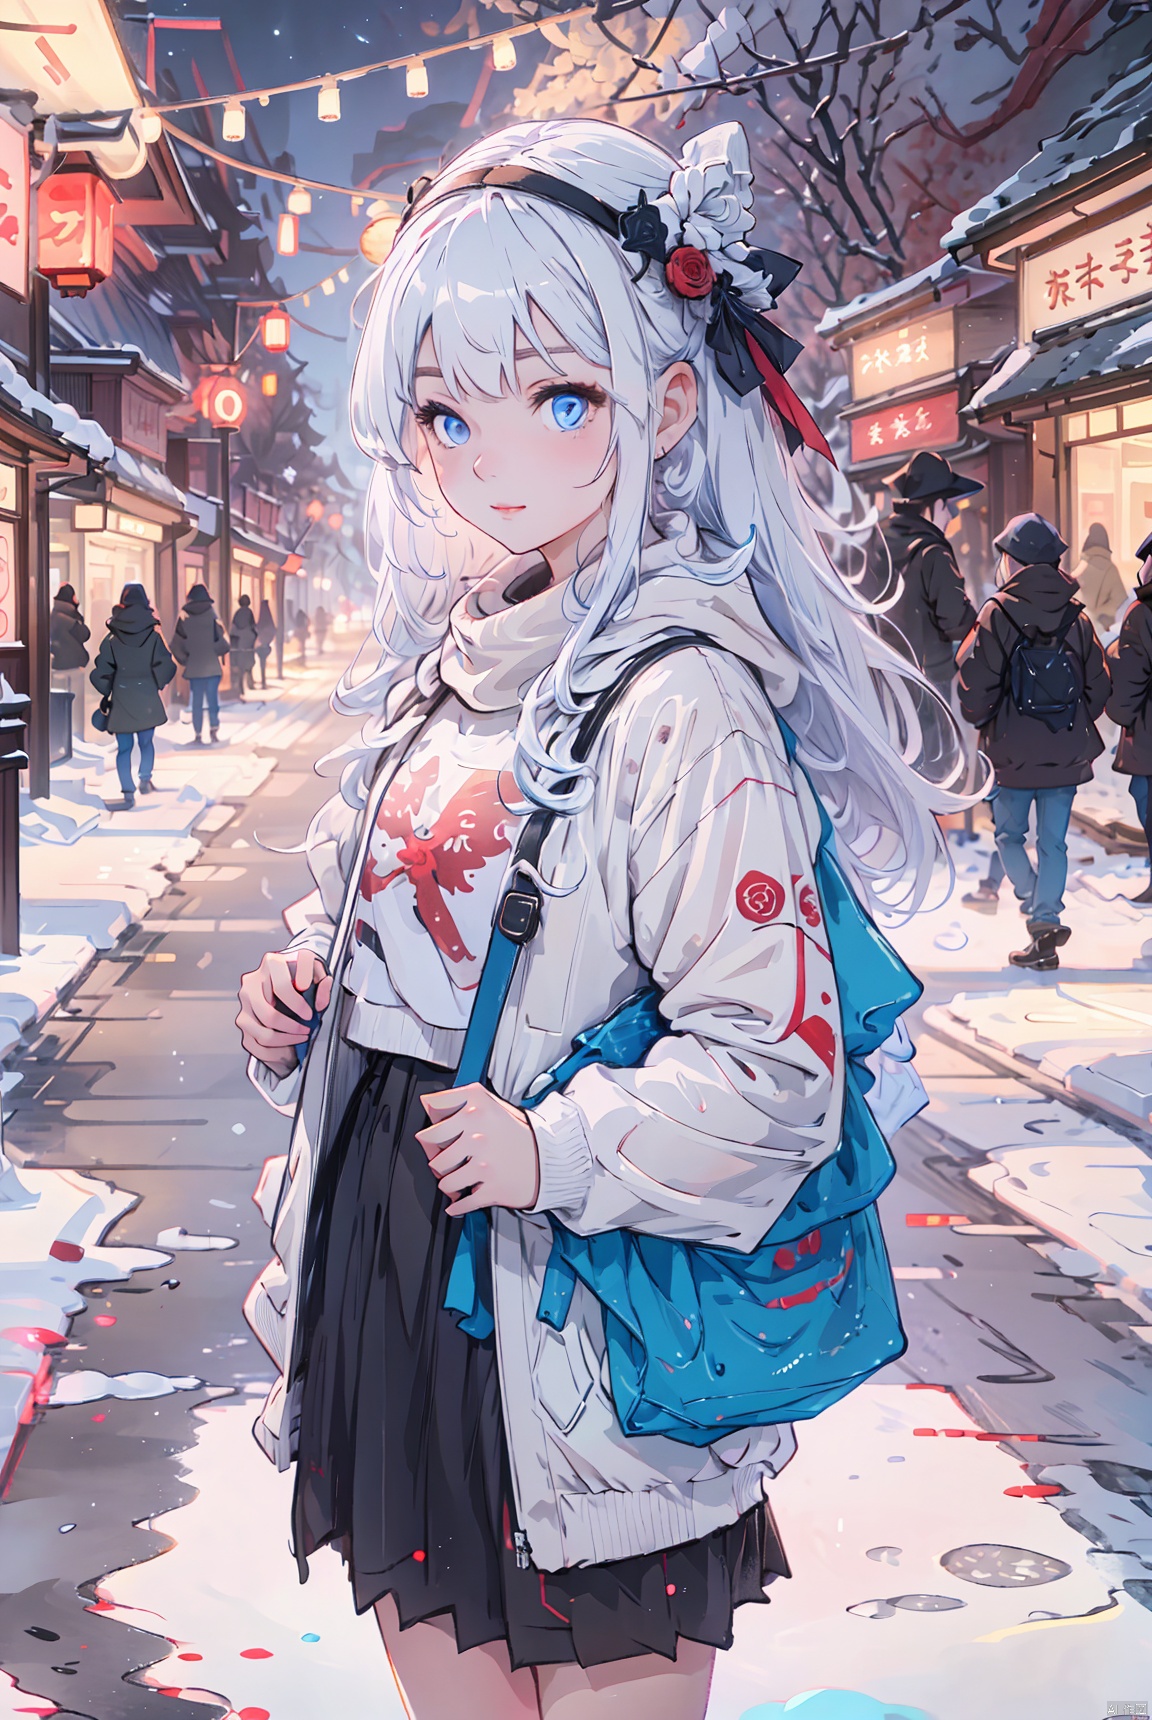  1 girl, frontal,blue eyes, white hair blowing in the wind, happy to look at the camera,small huts,street,,in winter,snowy, (red lantern:1.2),holding red gift,night,moon,light,